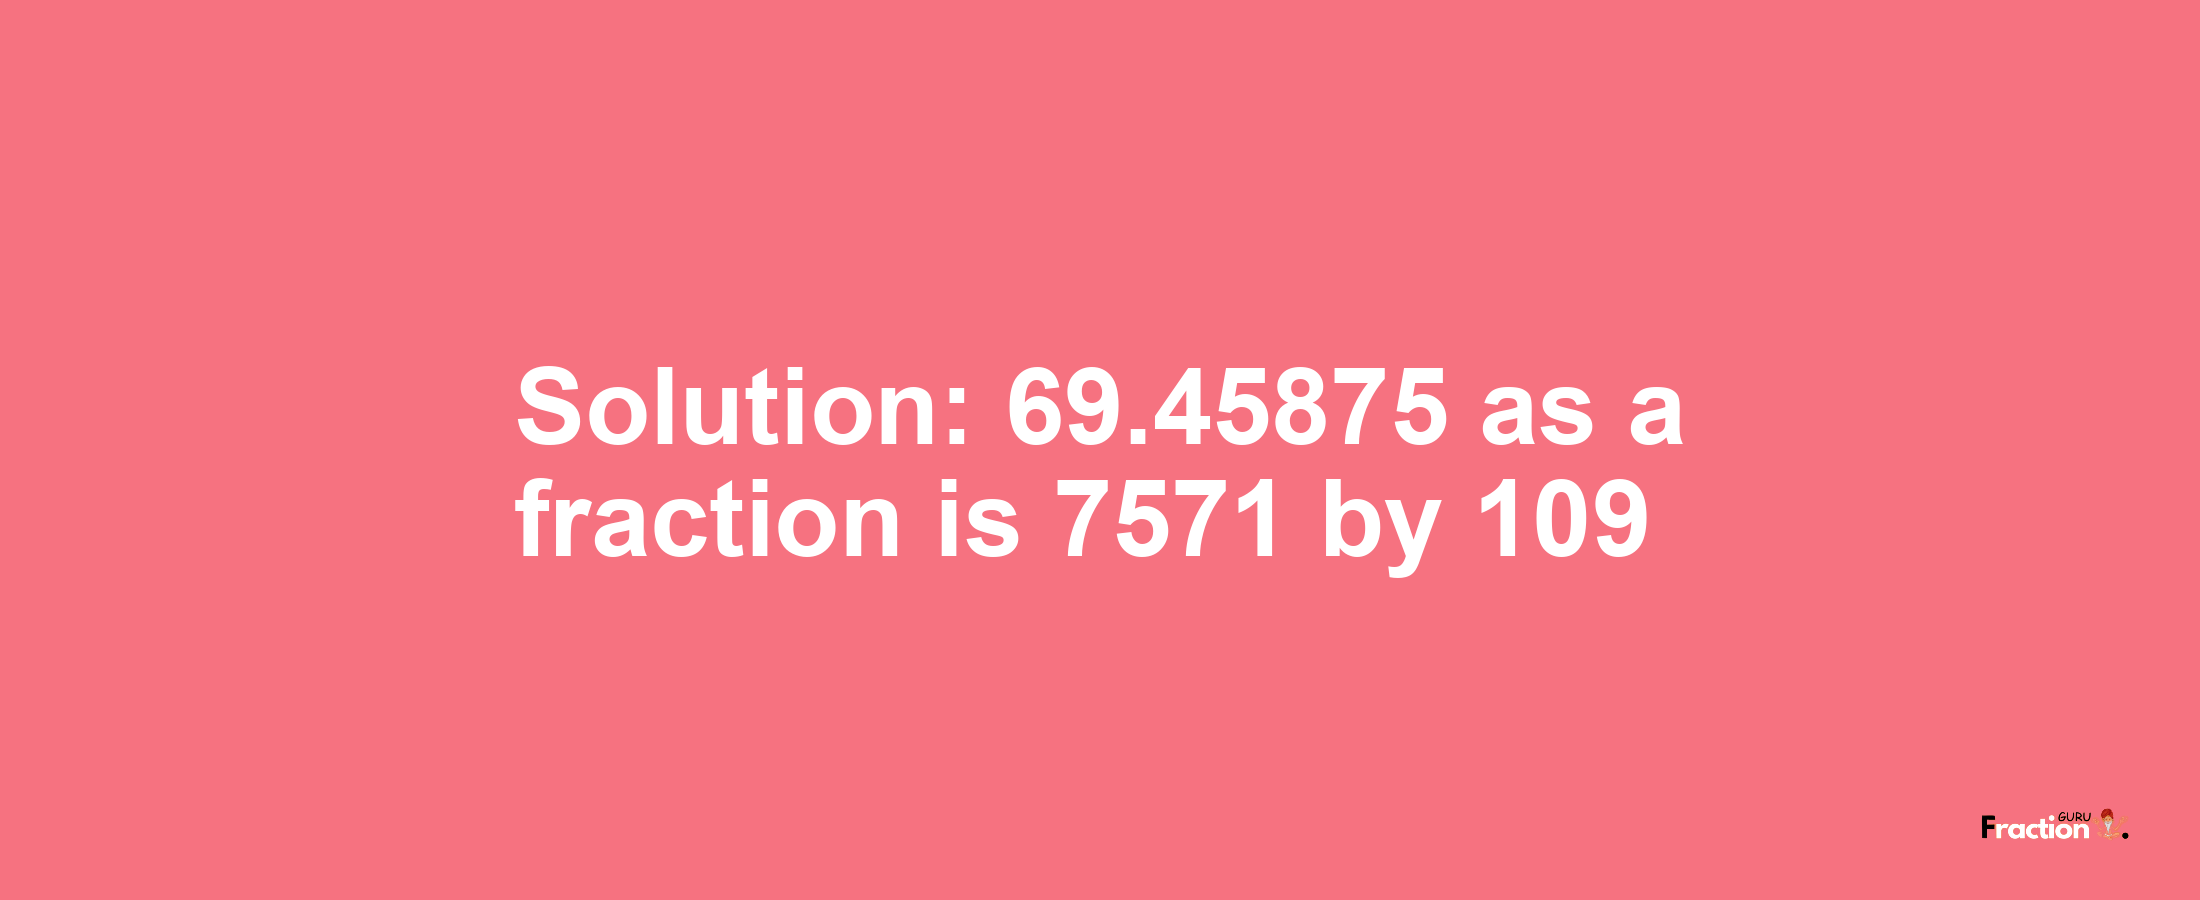 Solution:69.45875 as a fraction is 7571/109